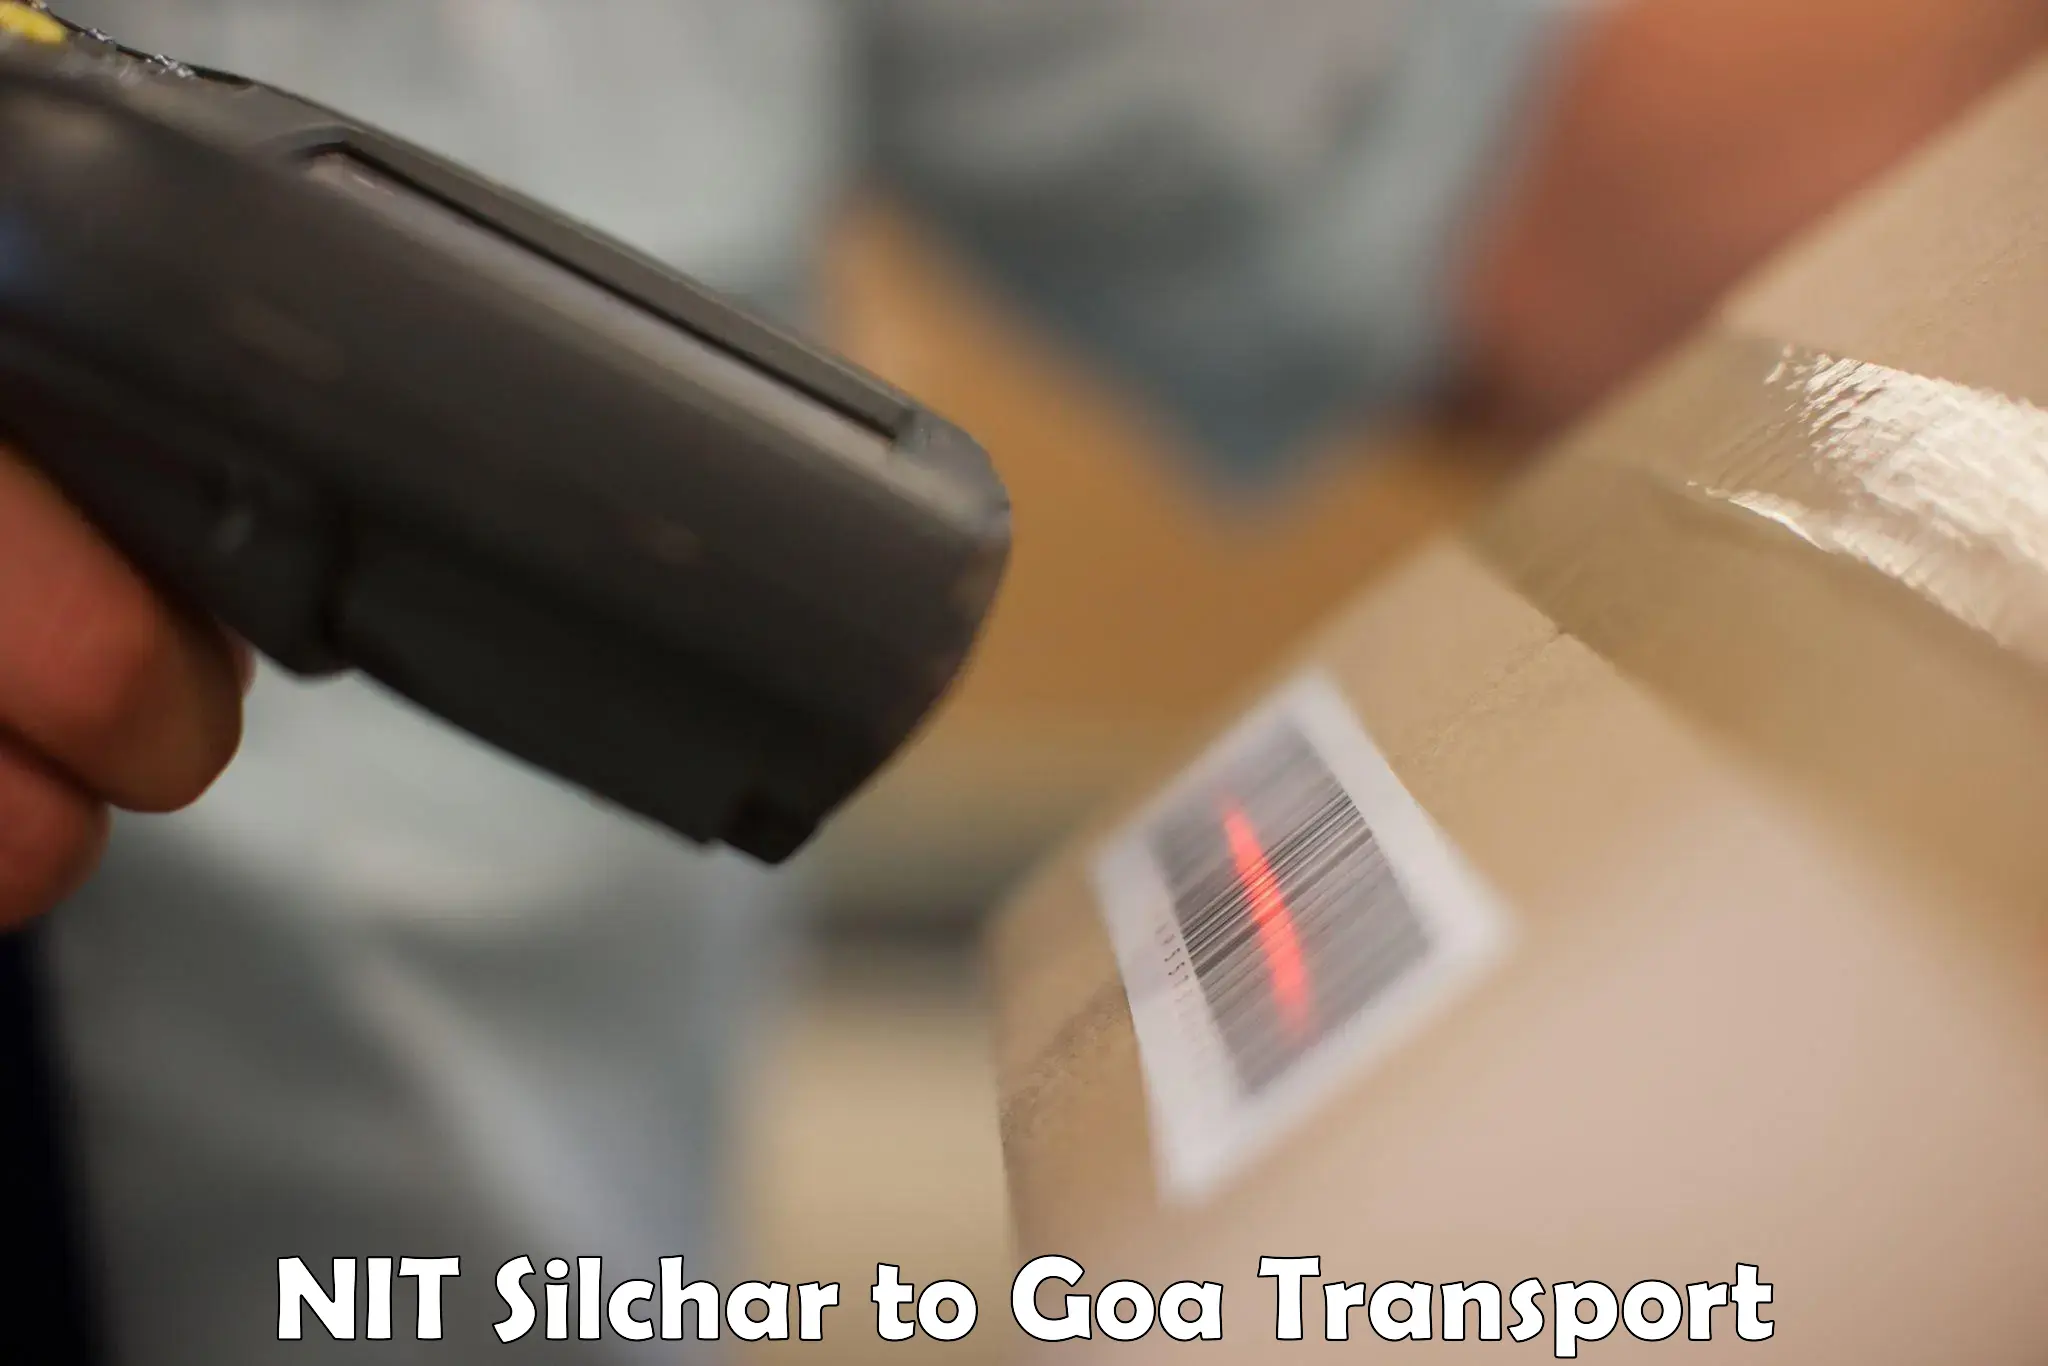 Transport bike from one state to another NIT Silchar to IIT Goa